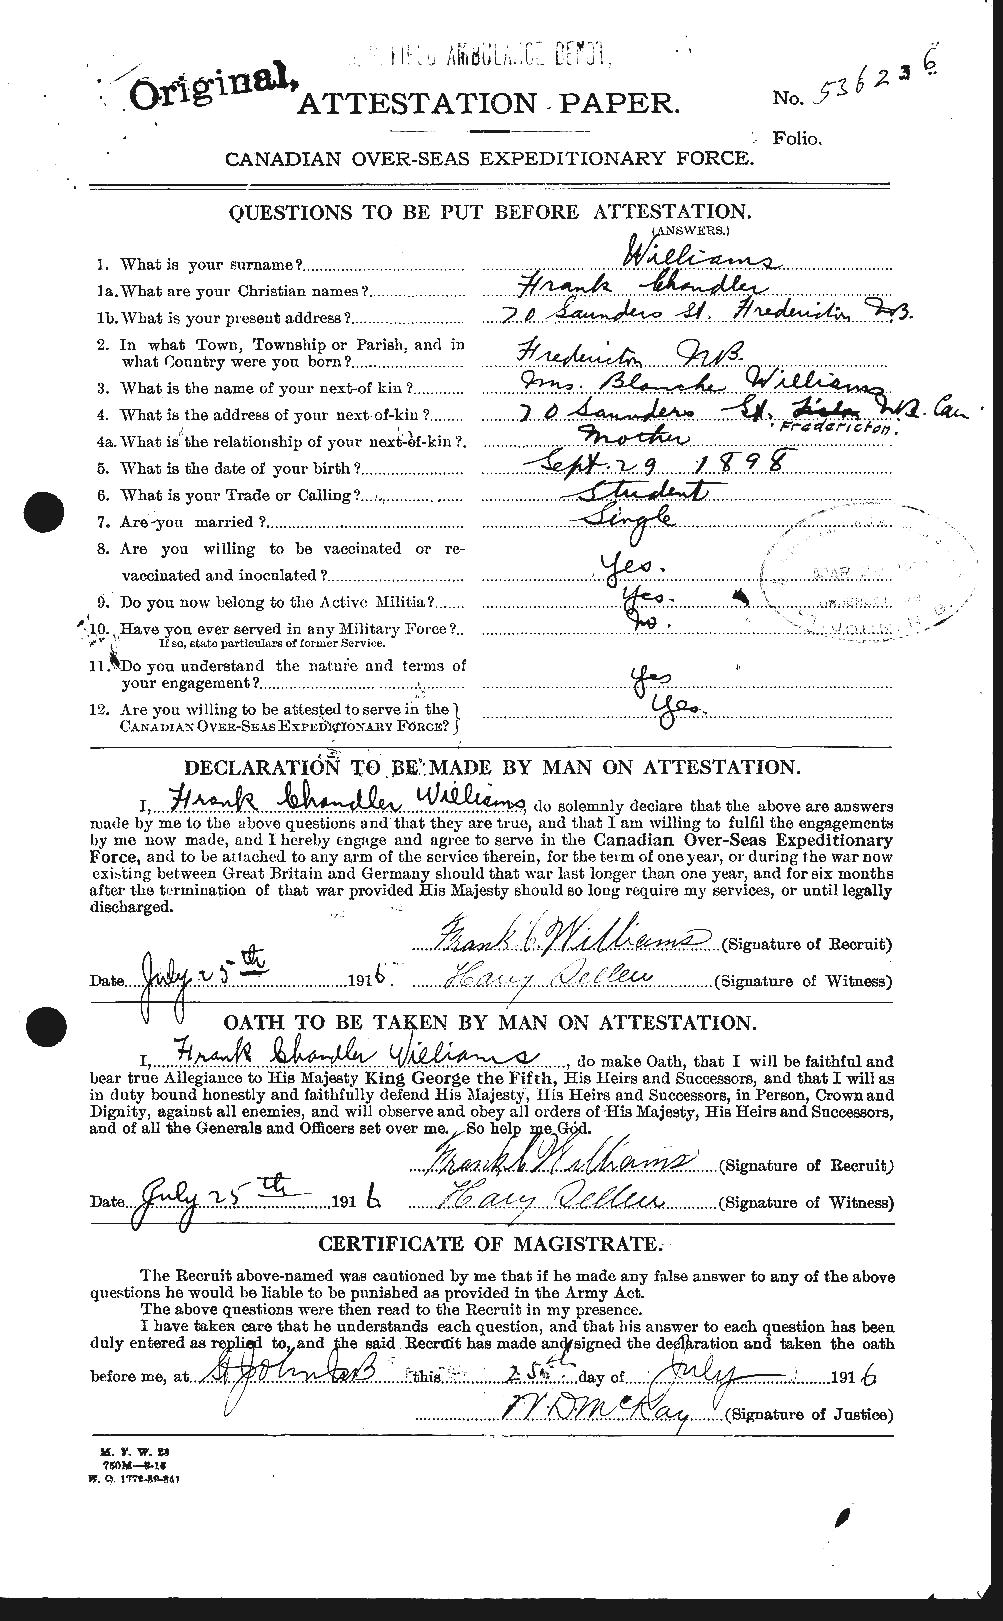 Personnel Records of the First World War - CEF 675873a